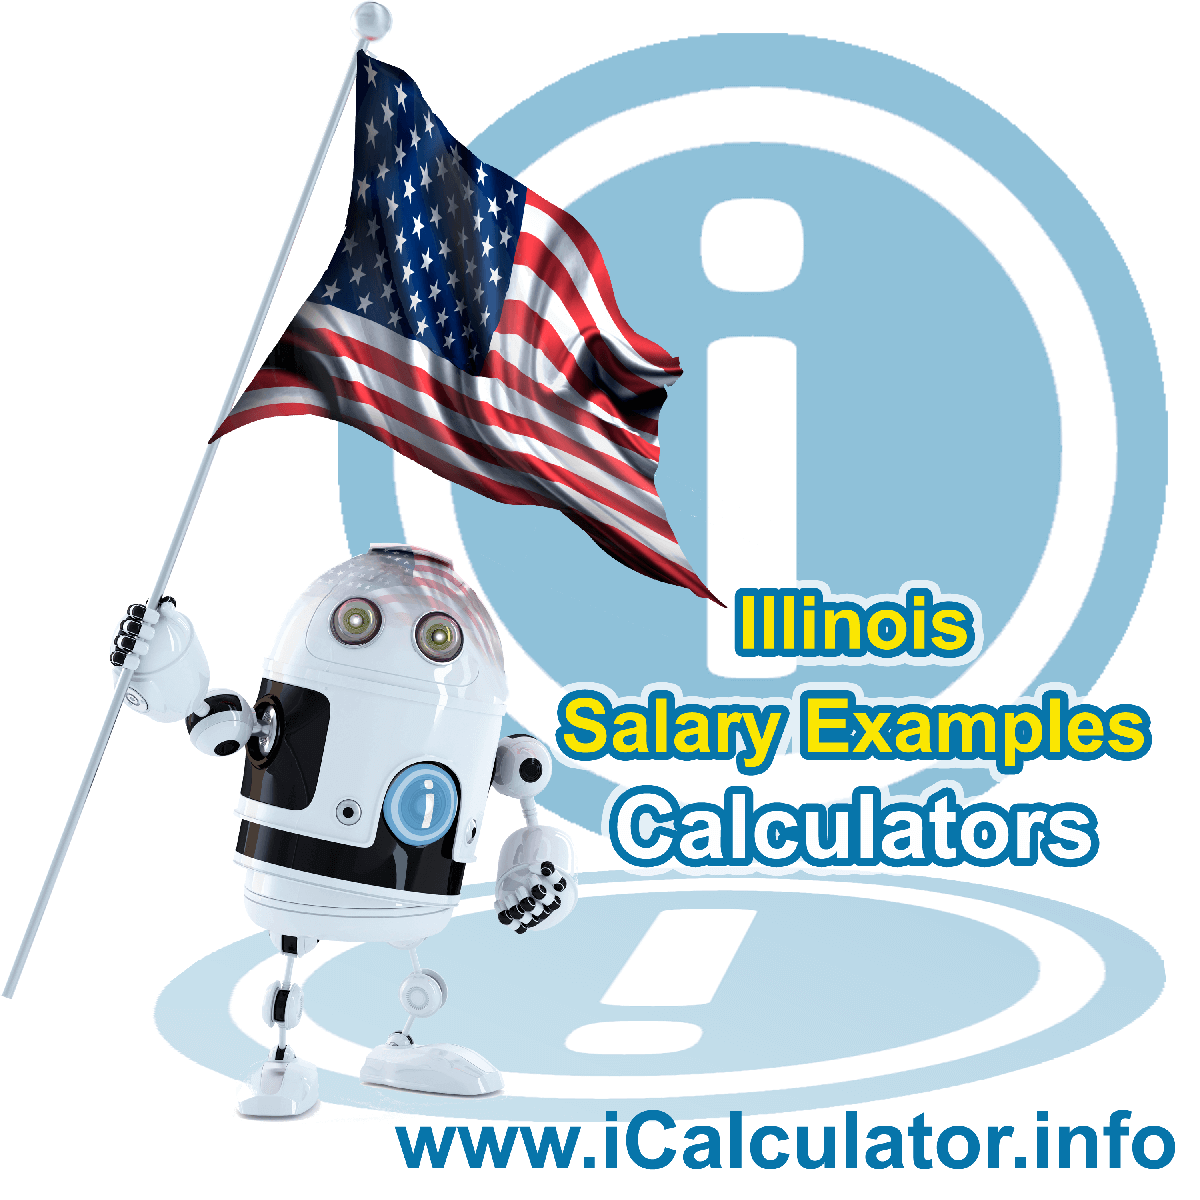 Illinois Salary Example for $ 170,000.00 in 2023 | iCalculator™ | $ 170,000.00 salary example for employee and employer paying Illinois State tincome taxes. Detailed salary after tax calculation including Illinois State Tax, Federal State Tax, Medicare Deductions, Social Security, Capital Gains and other income tax and salary deductions complete with supporting Illinois state tax tables 